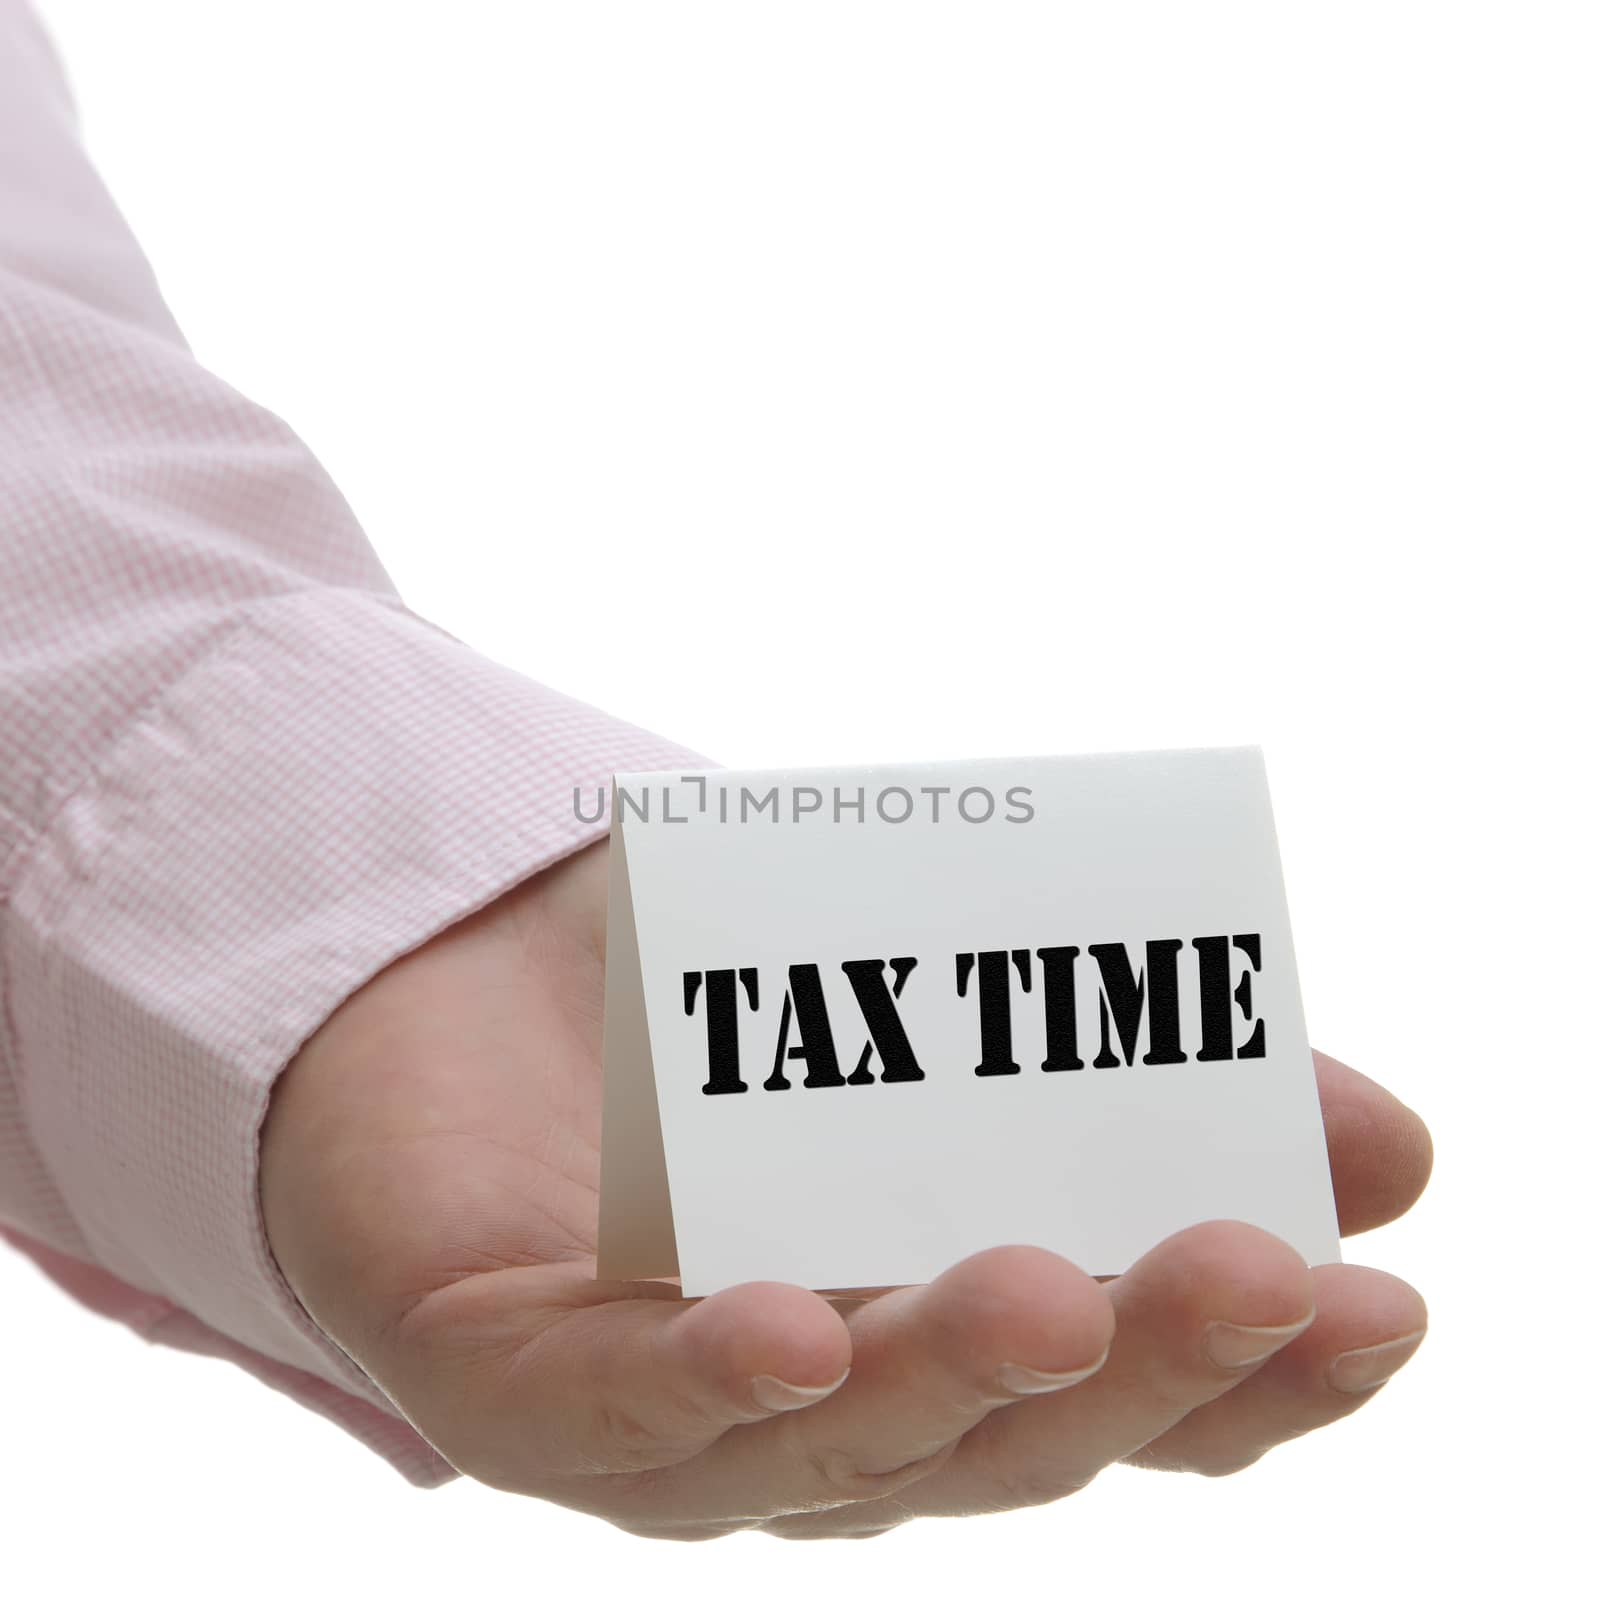 Business man holding tax time sign on hand